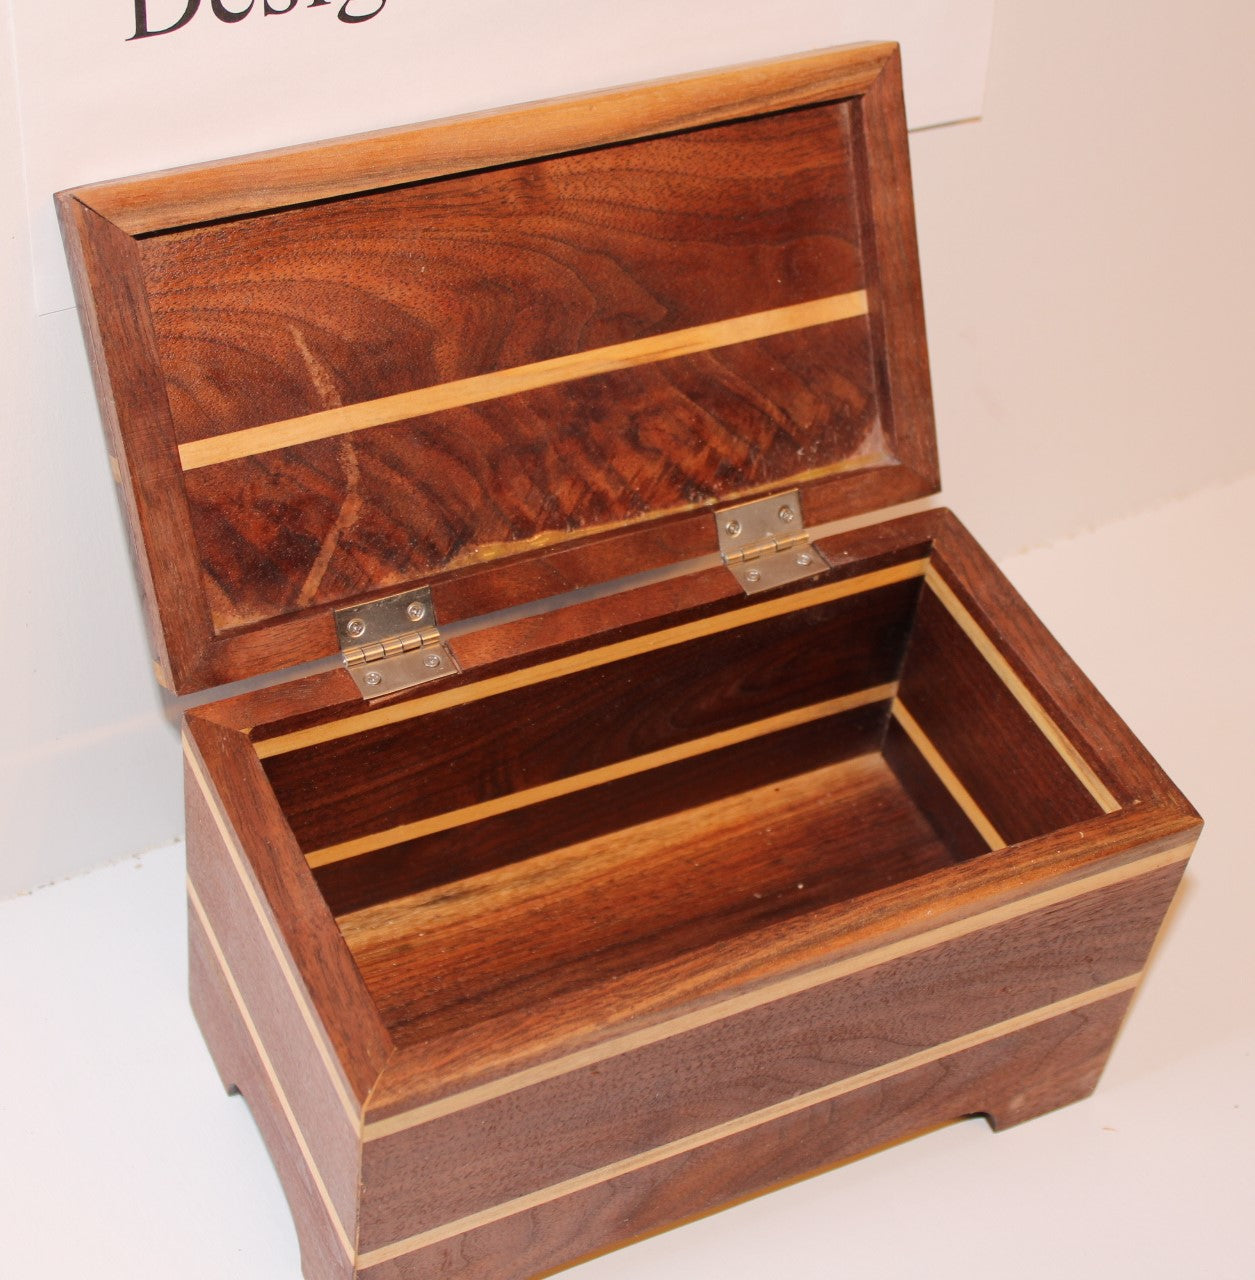 Jewelry Box with hinged Lid made from Walnut and Poplar